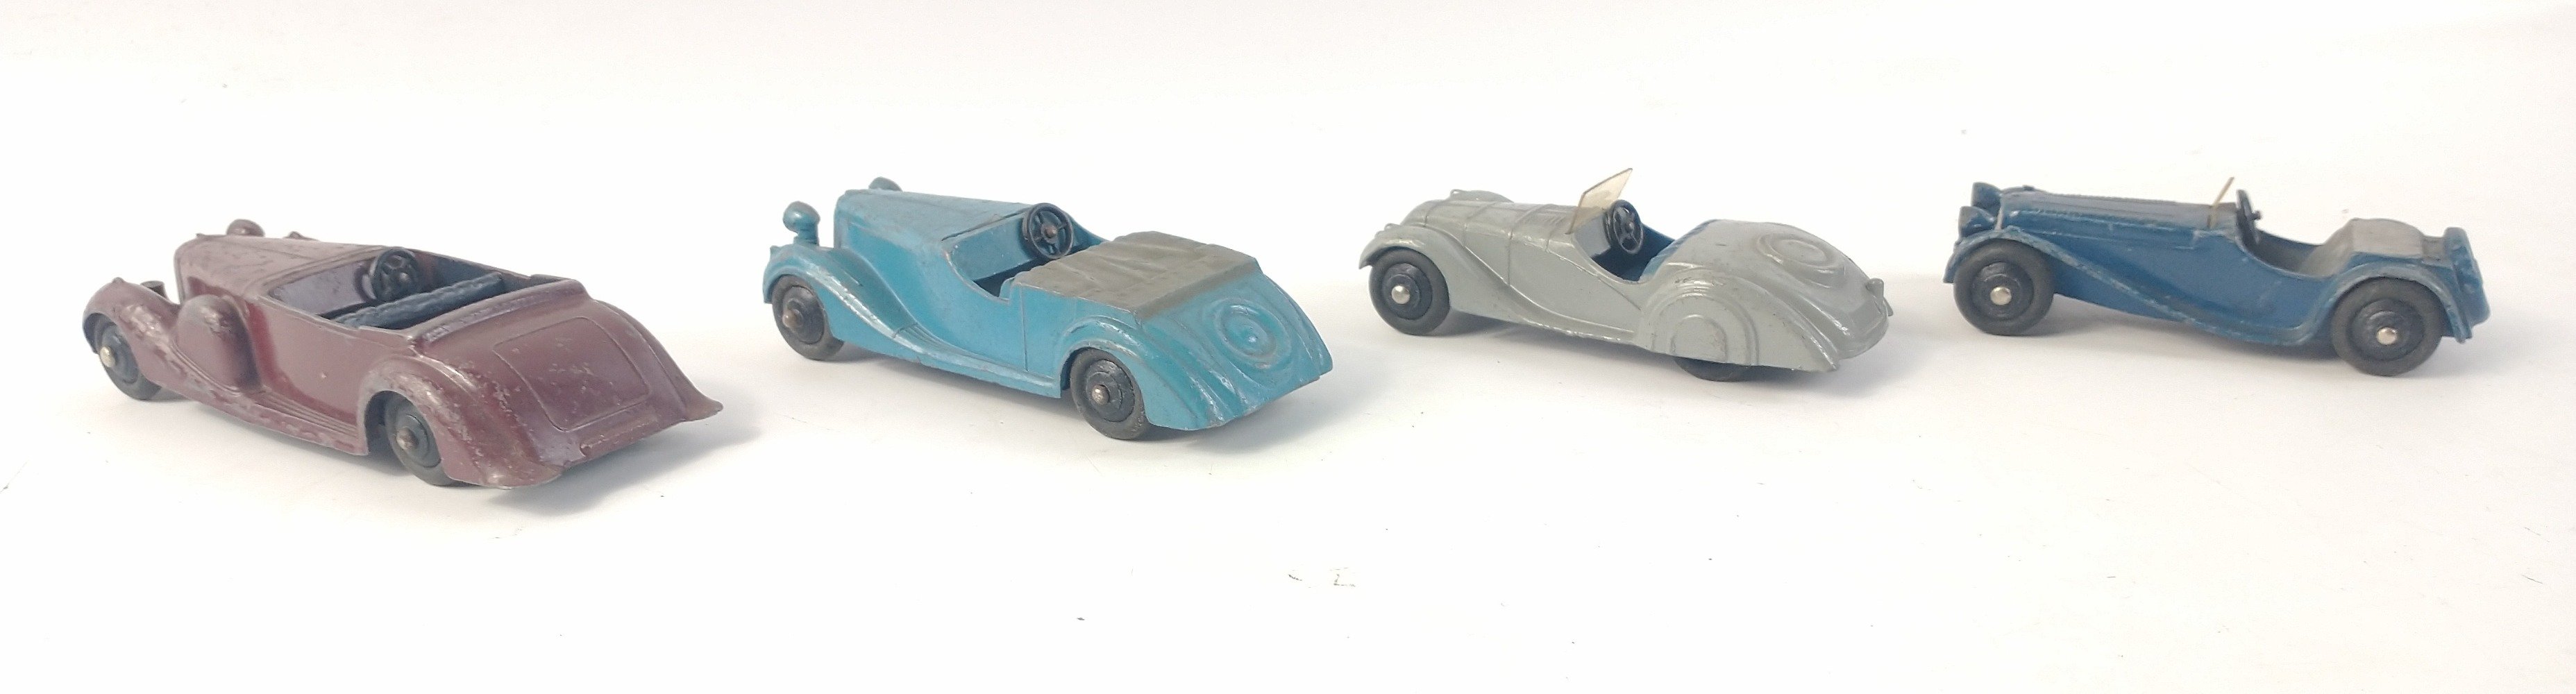 DINKY Sports cars to include Sunbeam Talbot with broken screen, Fraser Nash in great condition, - Image 2 of 3